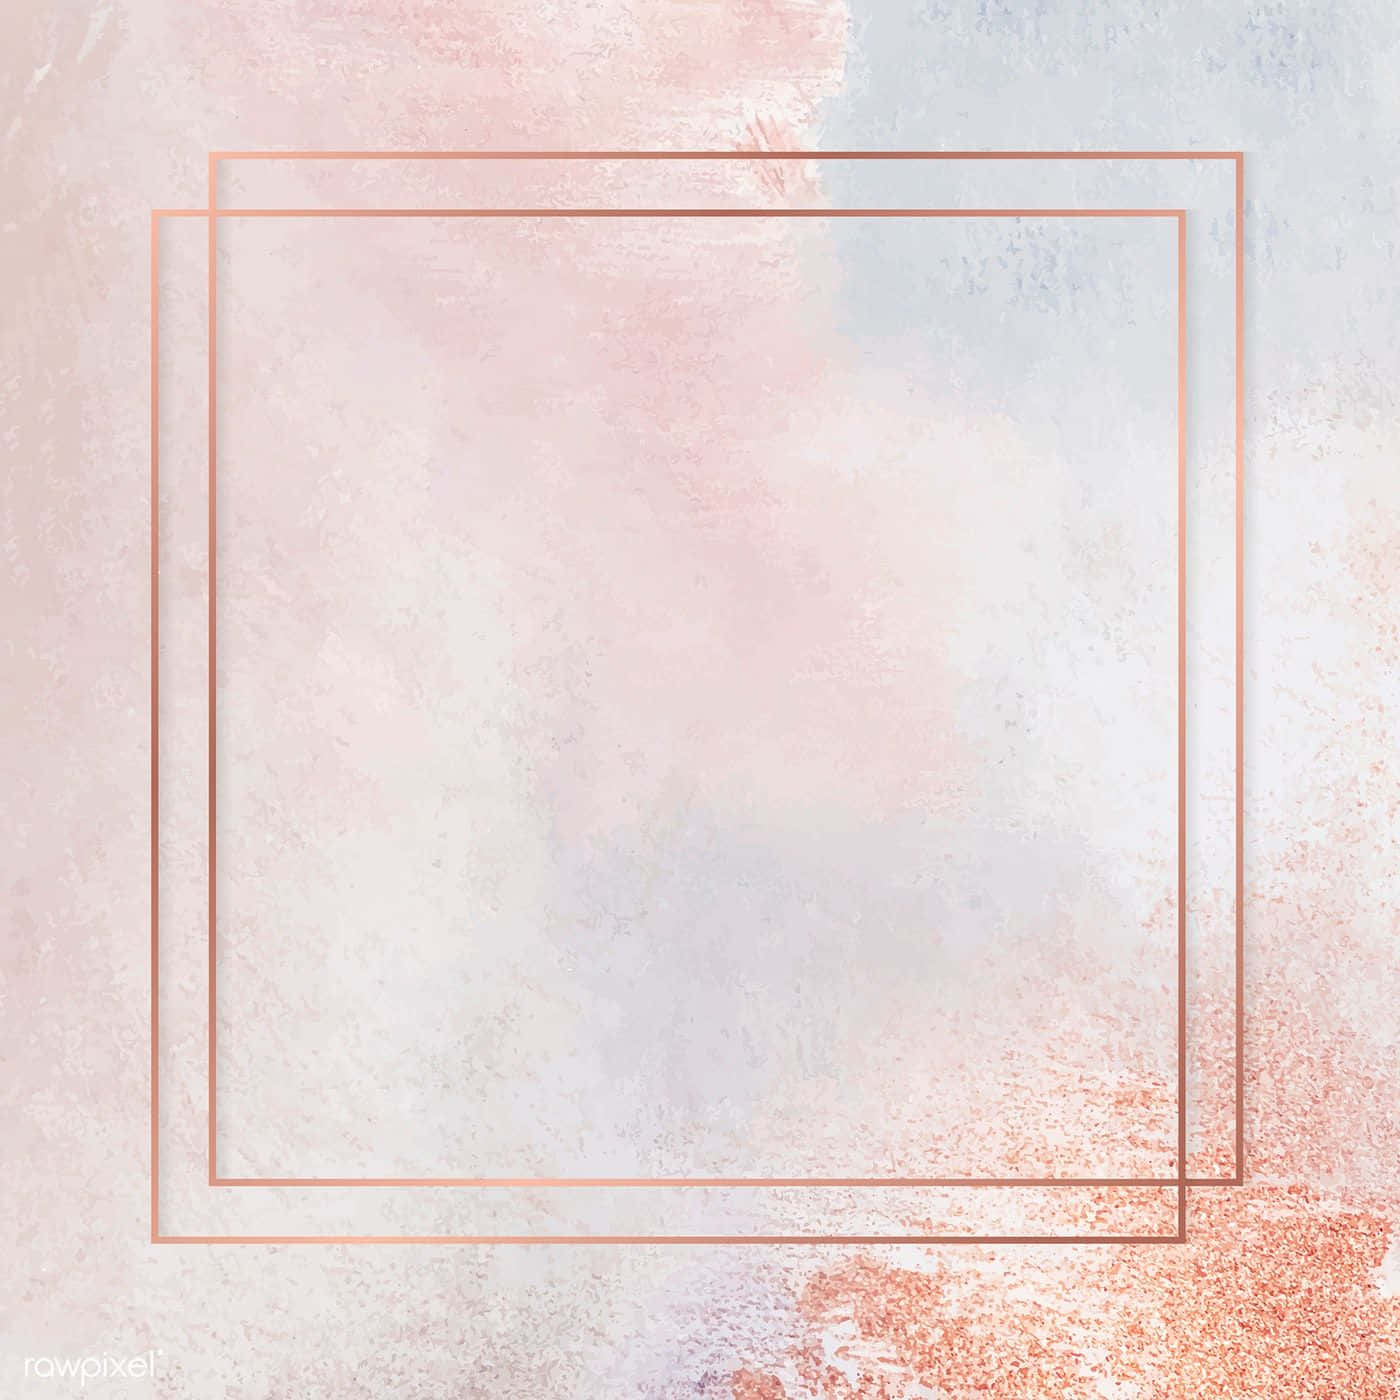 A Pink And White Square Frame On A Watercolor Background